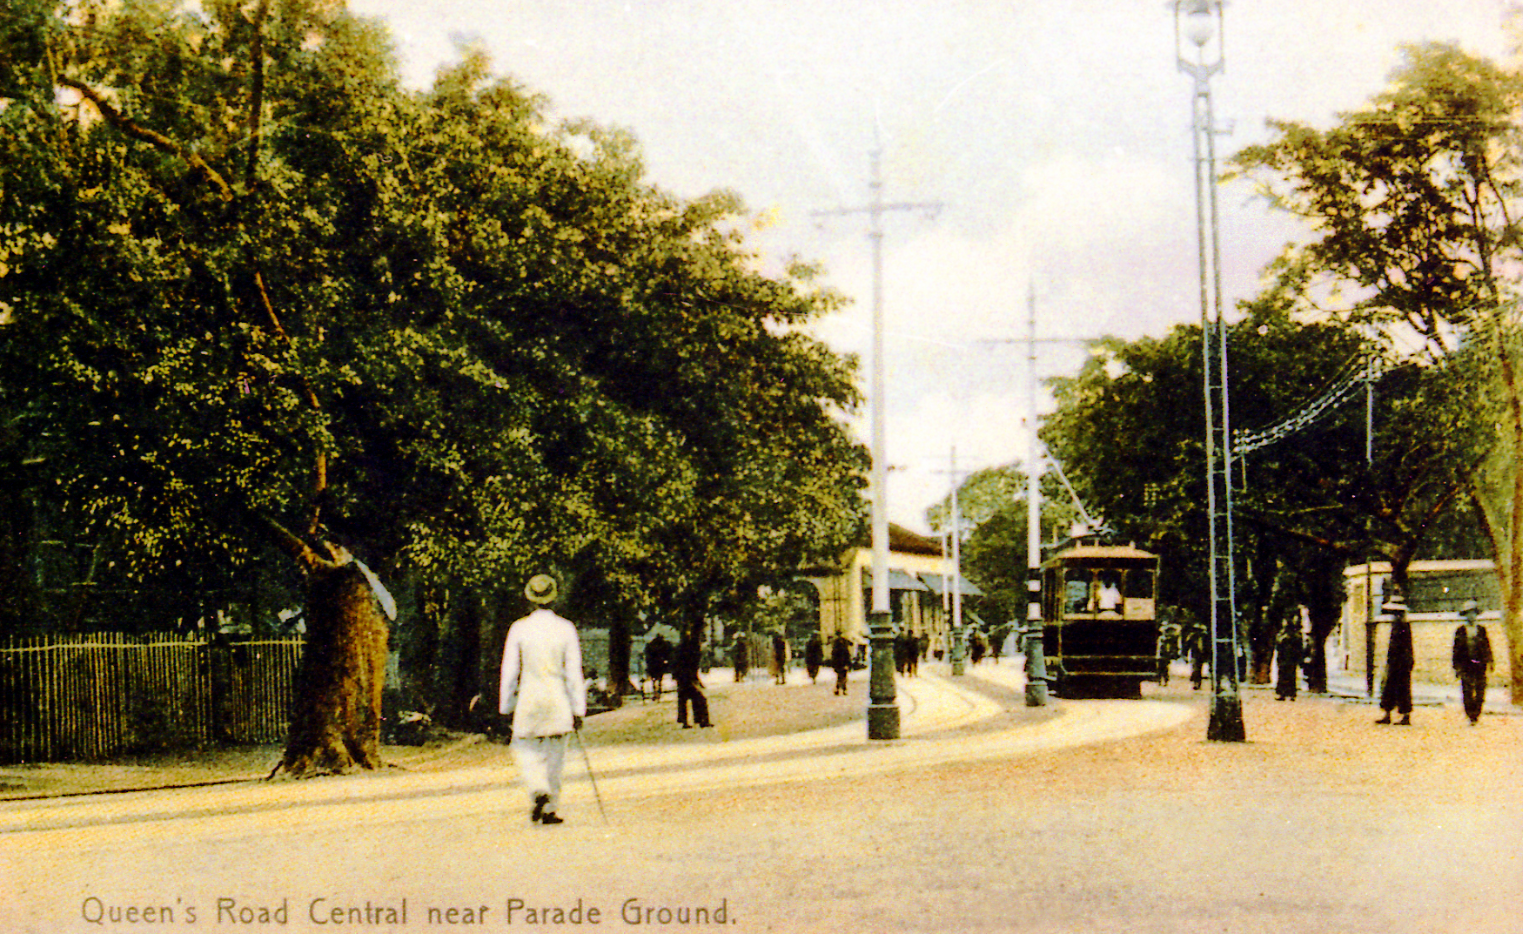 Single-deck trams on Central Queen's Road in 1910s